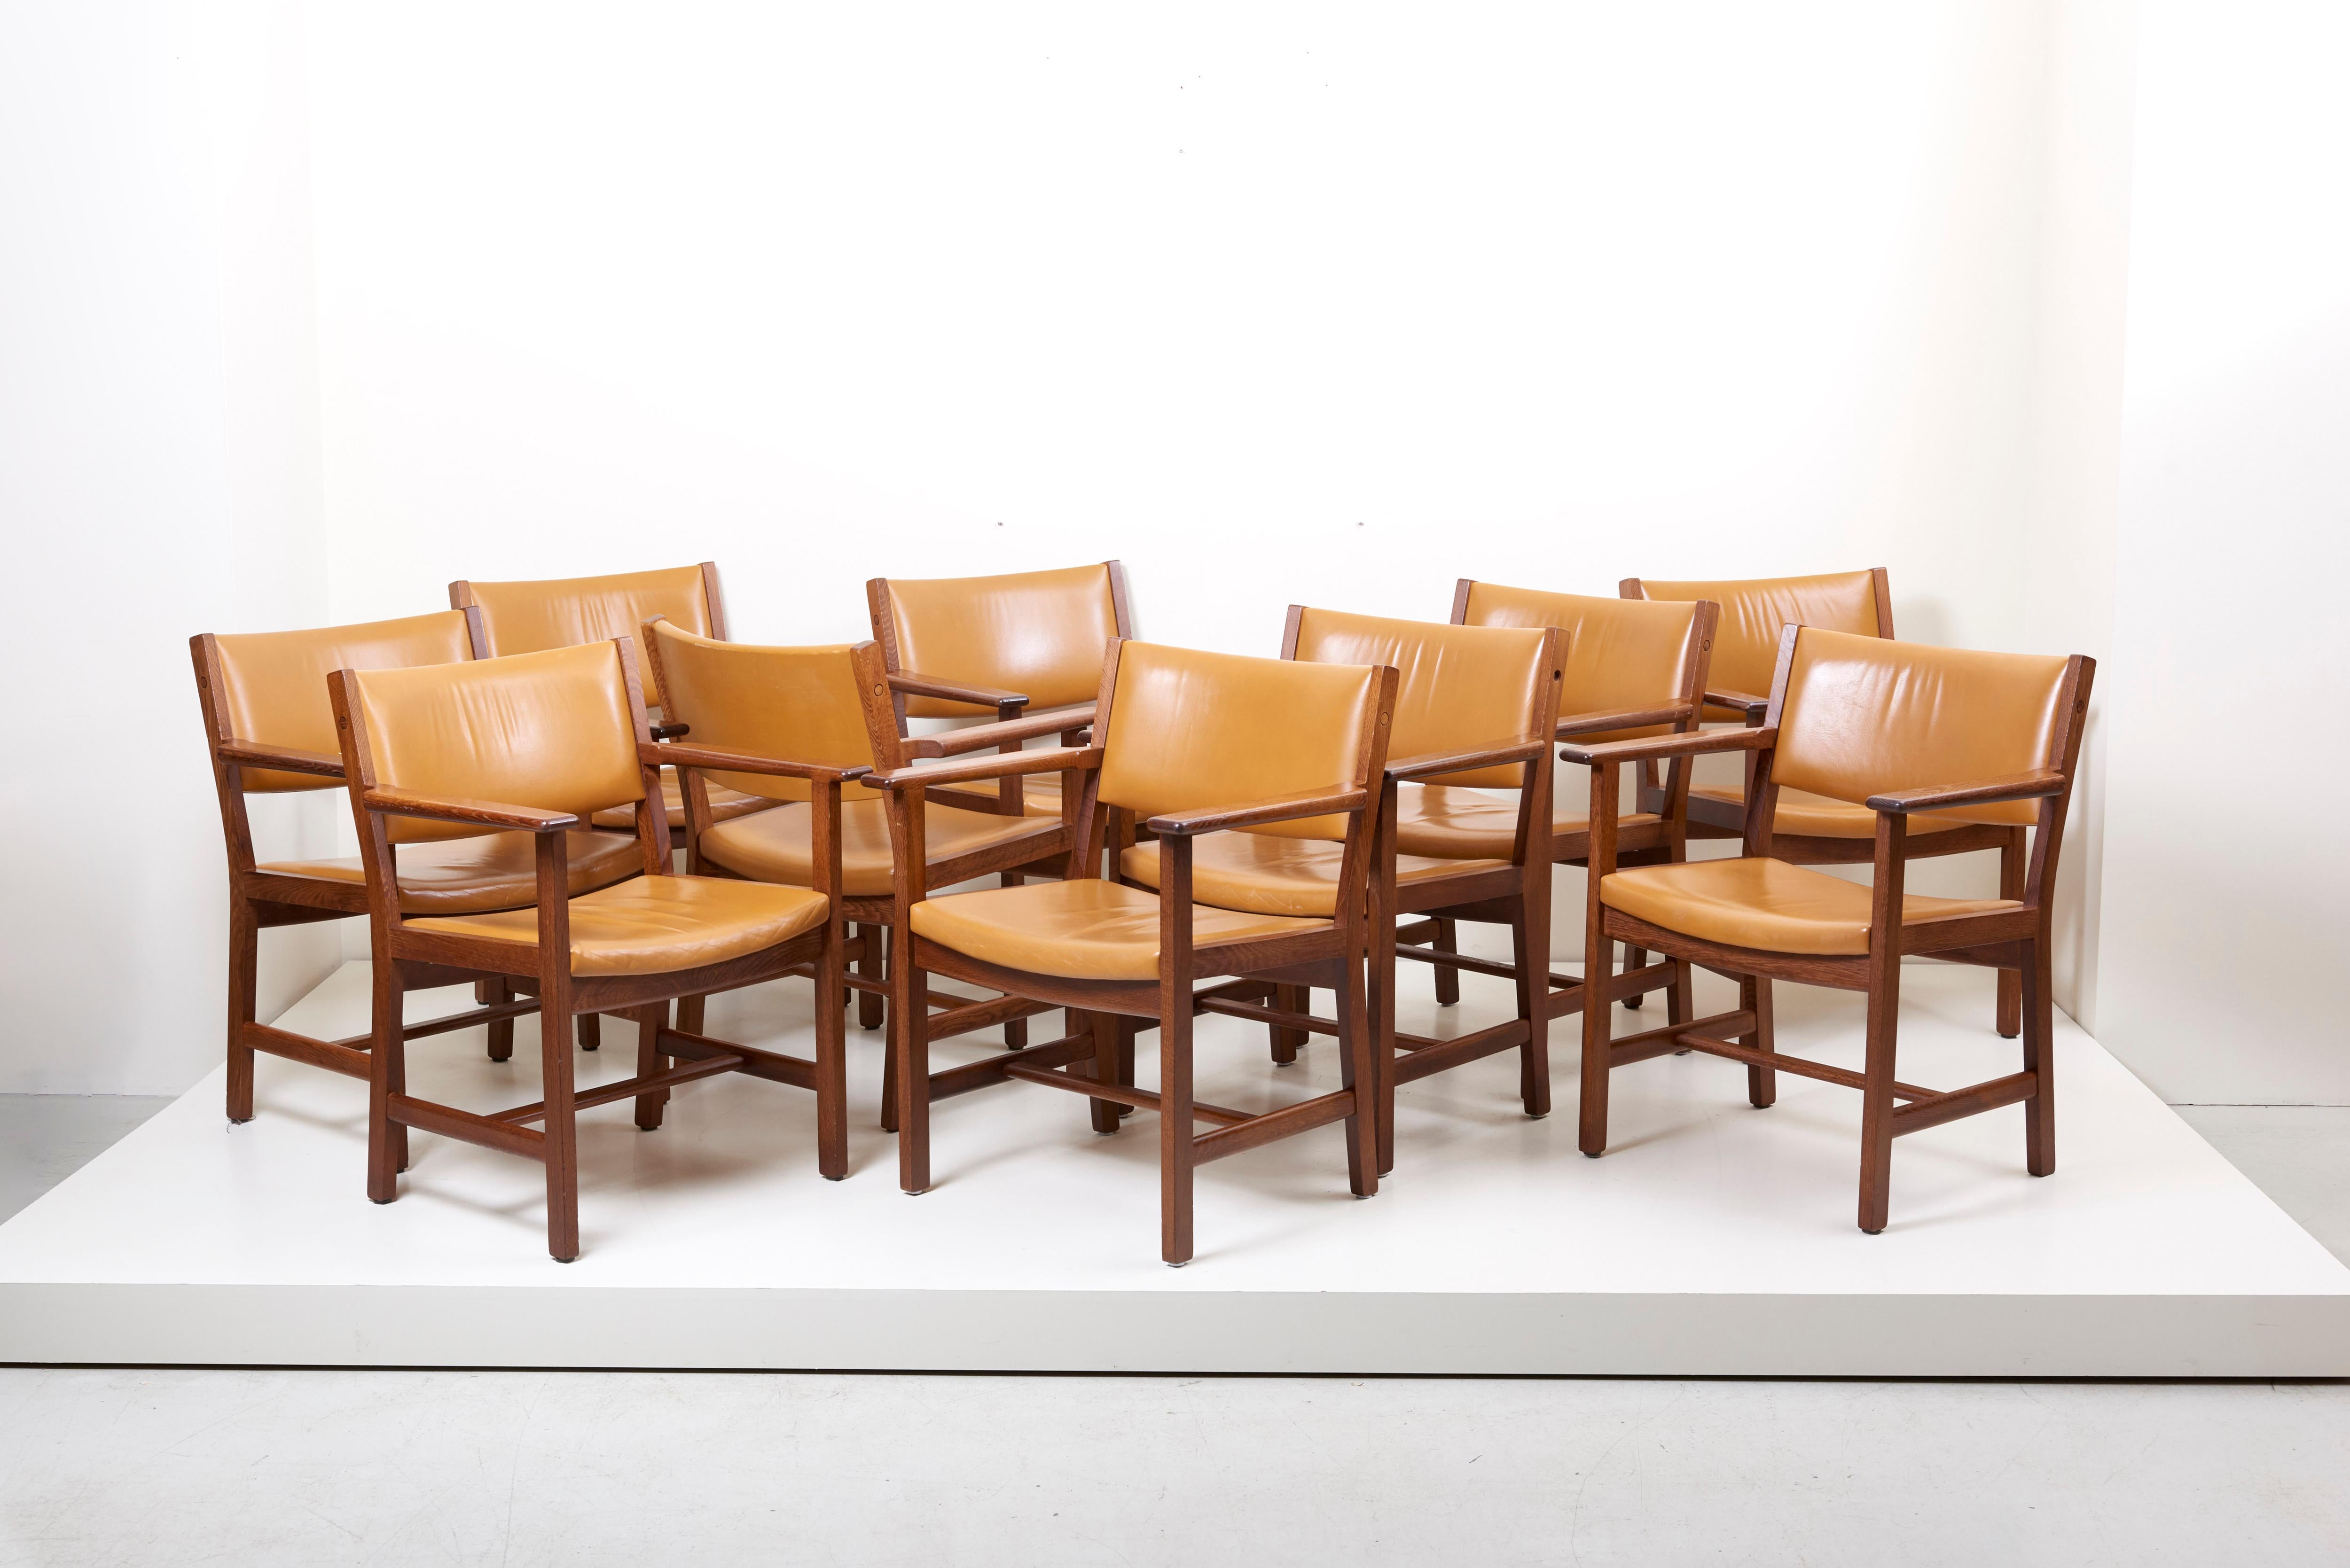 Set of 10 wooden and leather armchairs.
Design by Hans Wegner, 1960s.
Produced by GETAMA, Denmark. The seat shows wear of use.